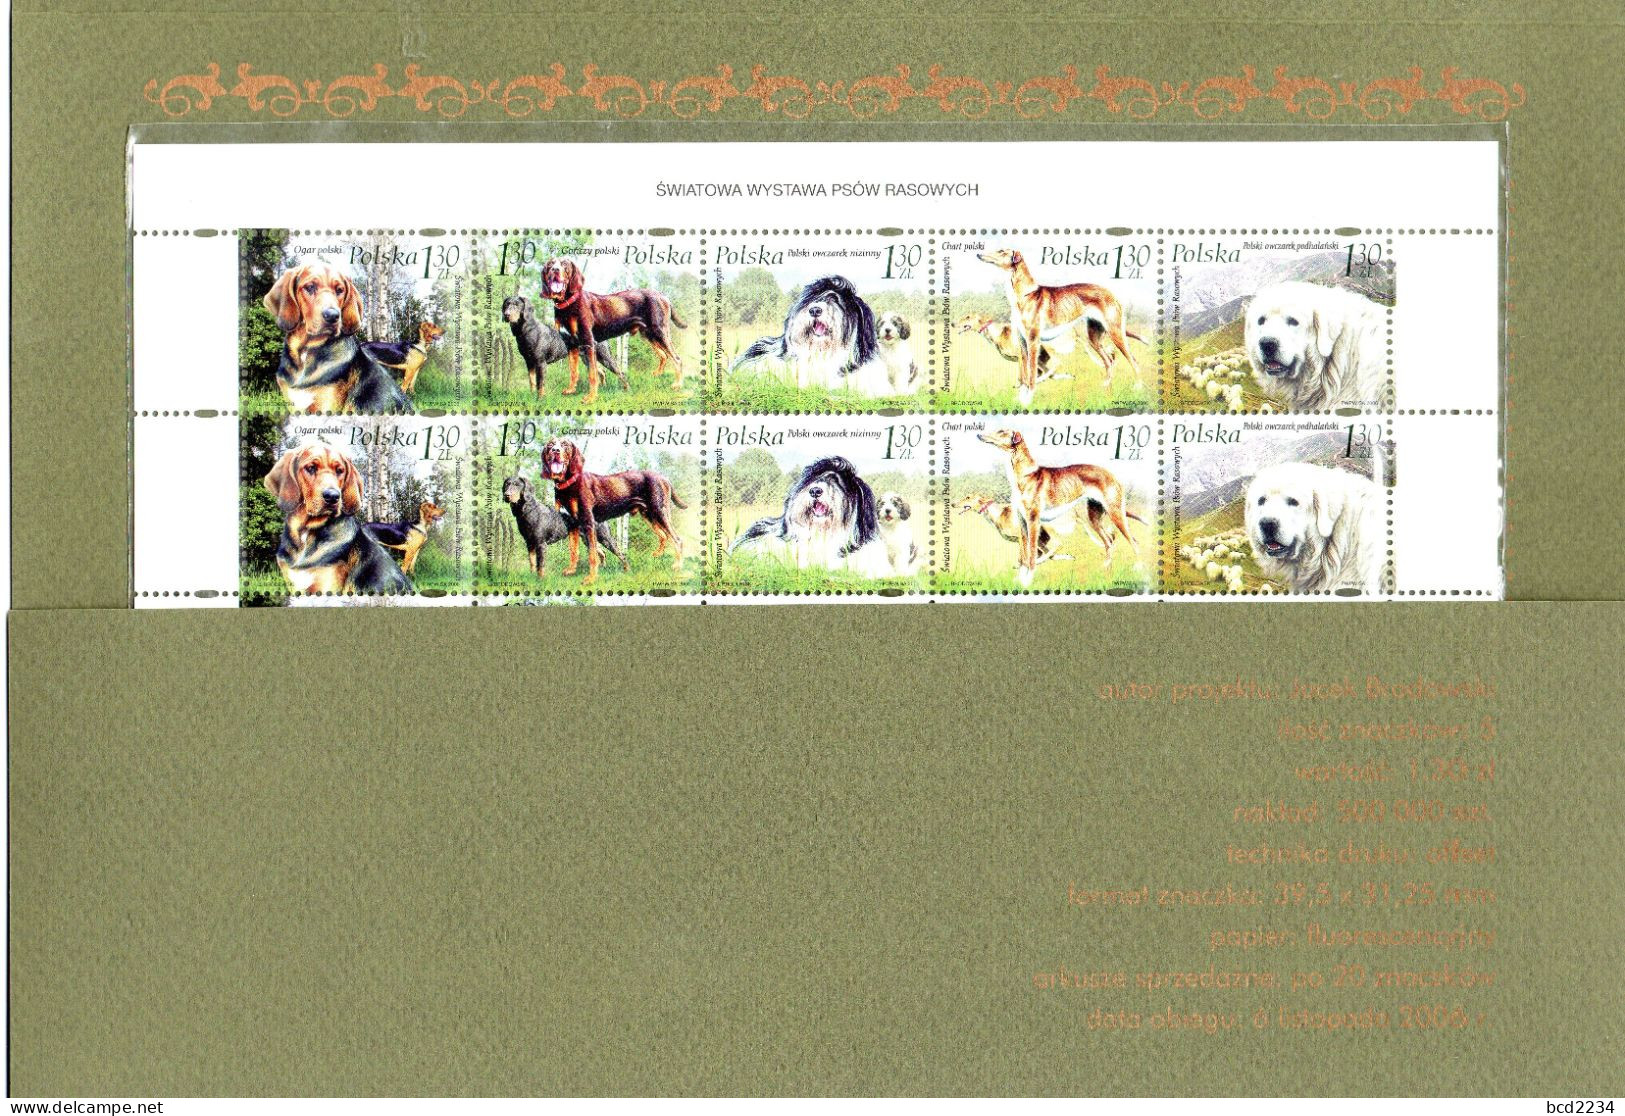 POLAND 2006 RARE POLISH POST OFFICE LIMITED EDITION FOLDER: SHEET OF 20 STAMPS OF WORLD EXHIBITION SHOW PEDIGREE DOGS - Briefe U. Dokumente